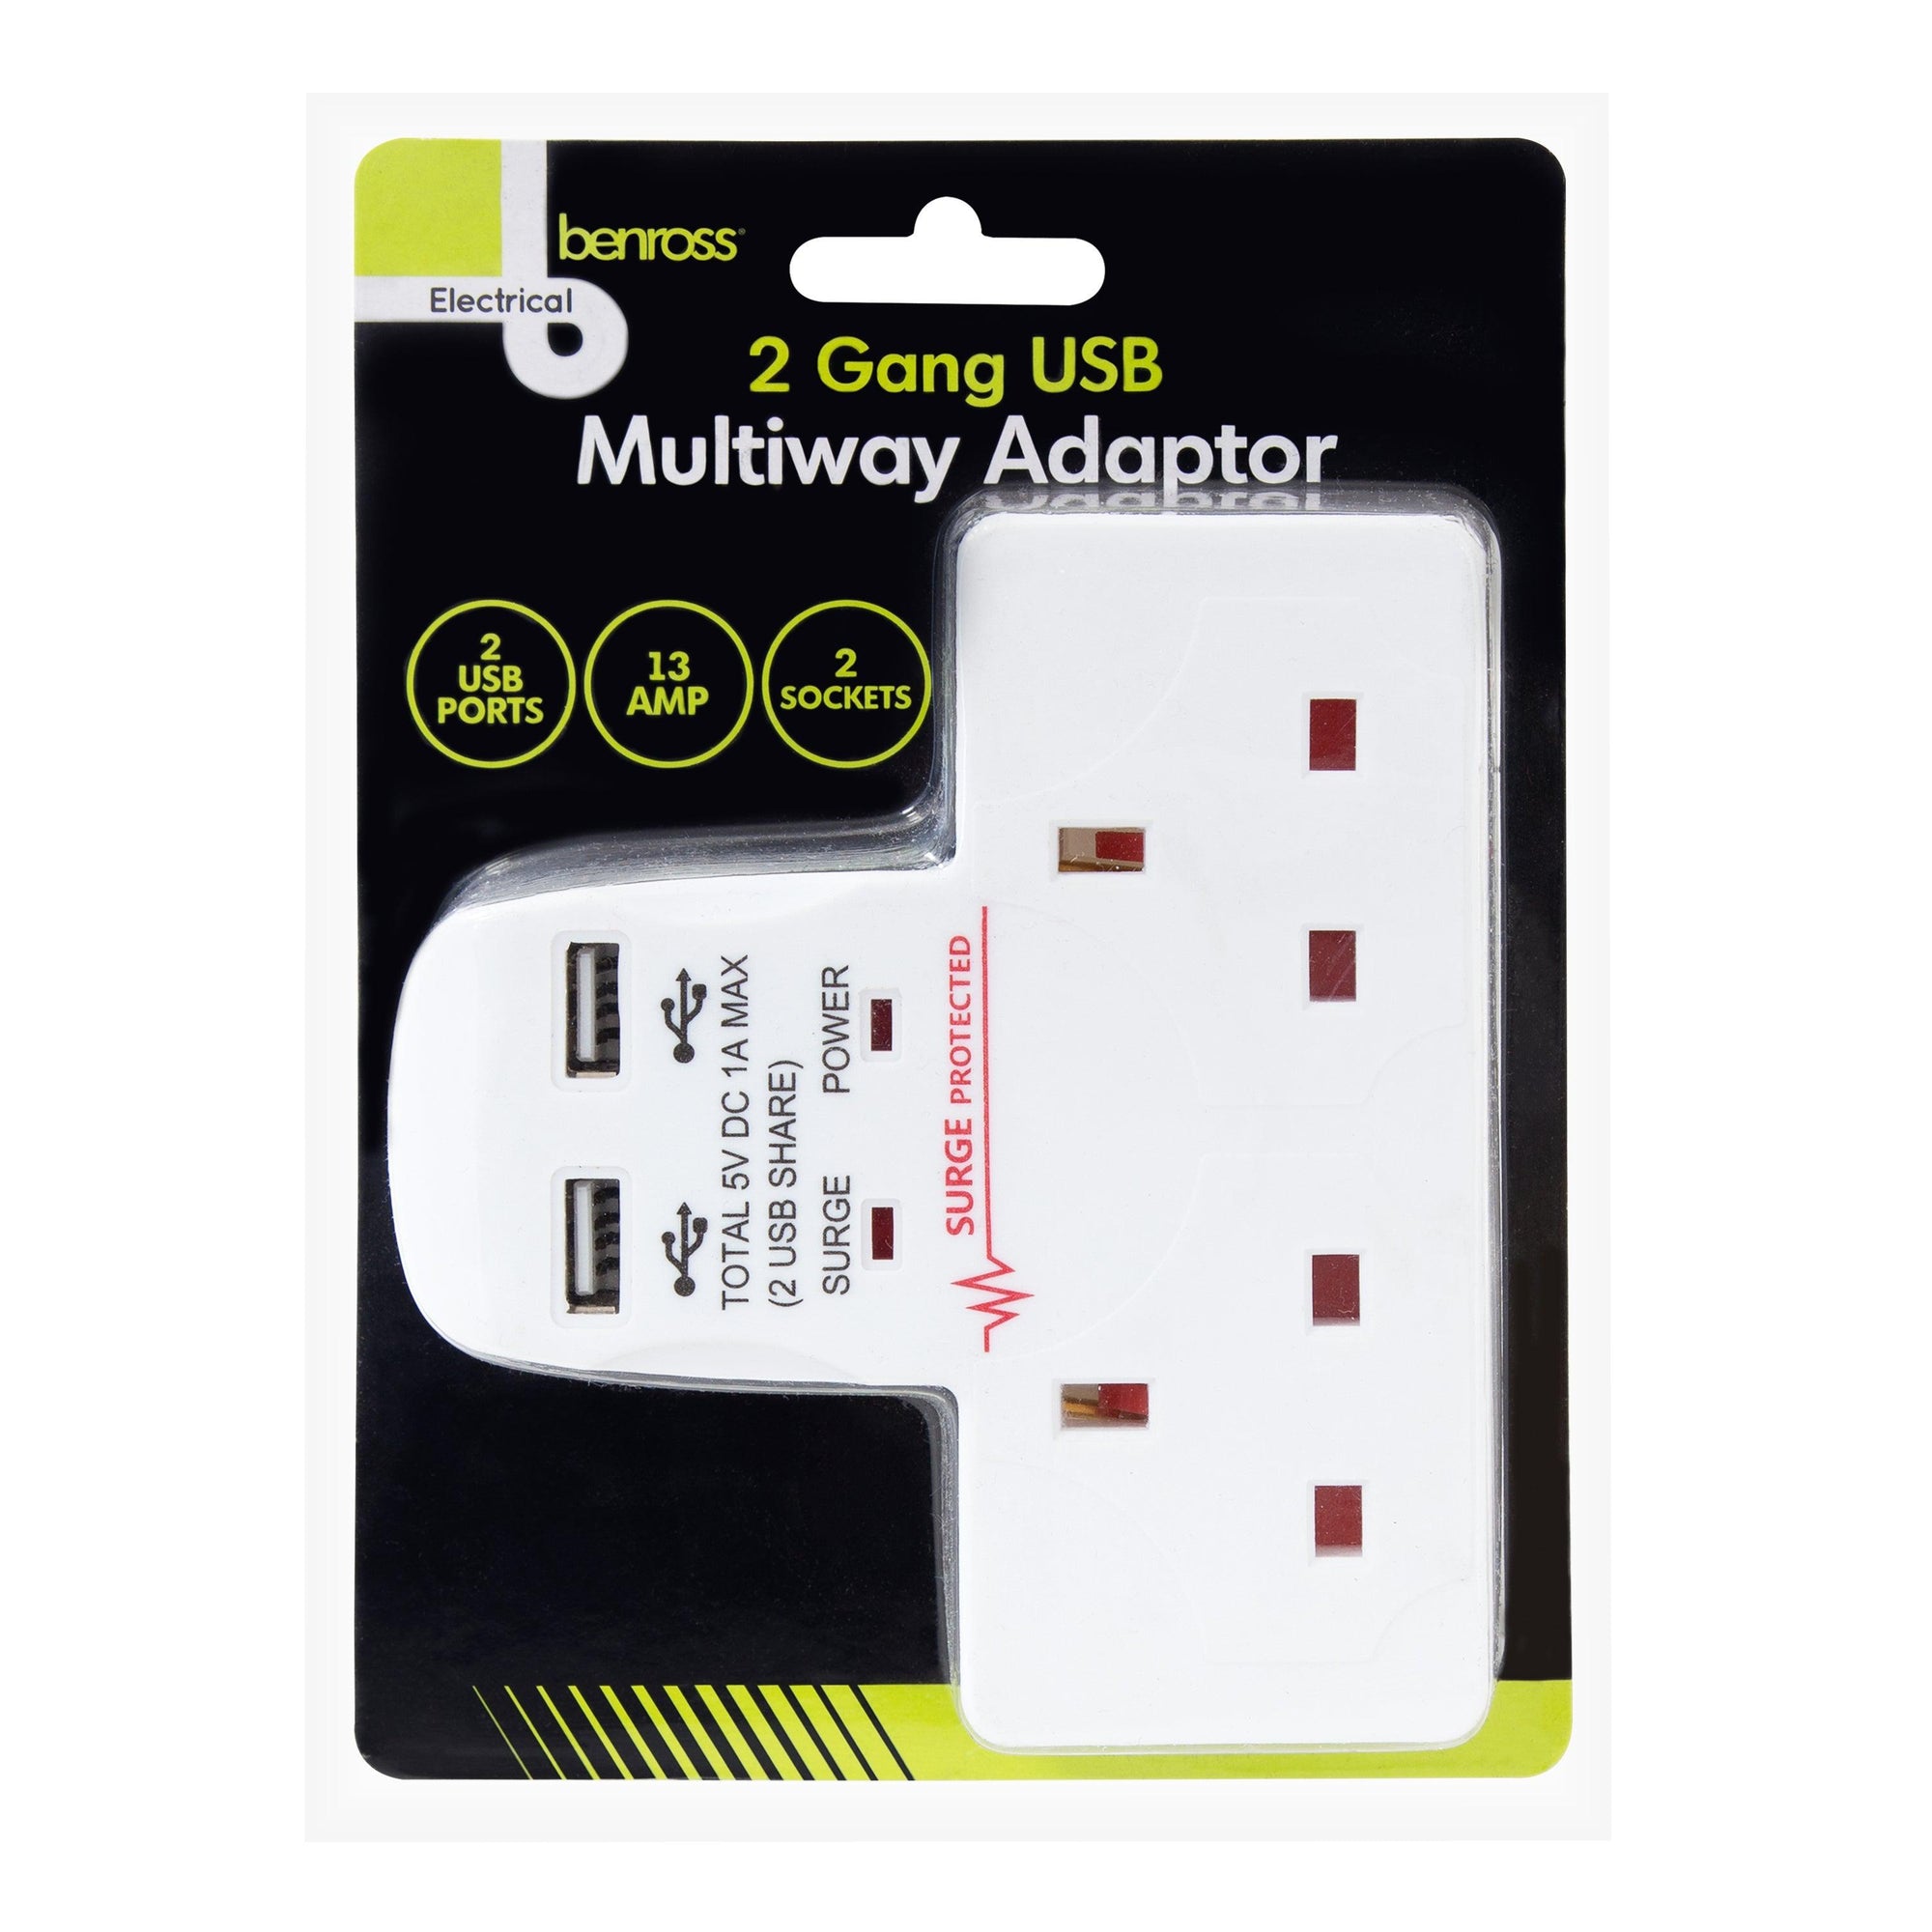 Benross 2 Gang Multiway Adapter With 2 USB ports 13A - Choice Stores